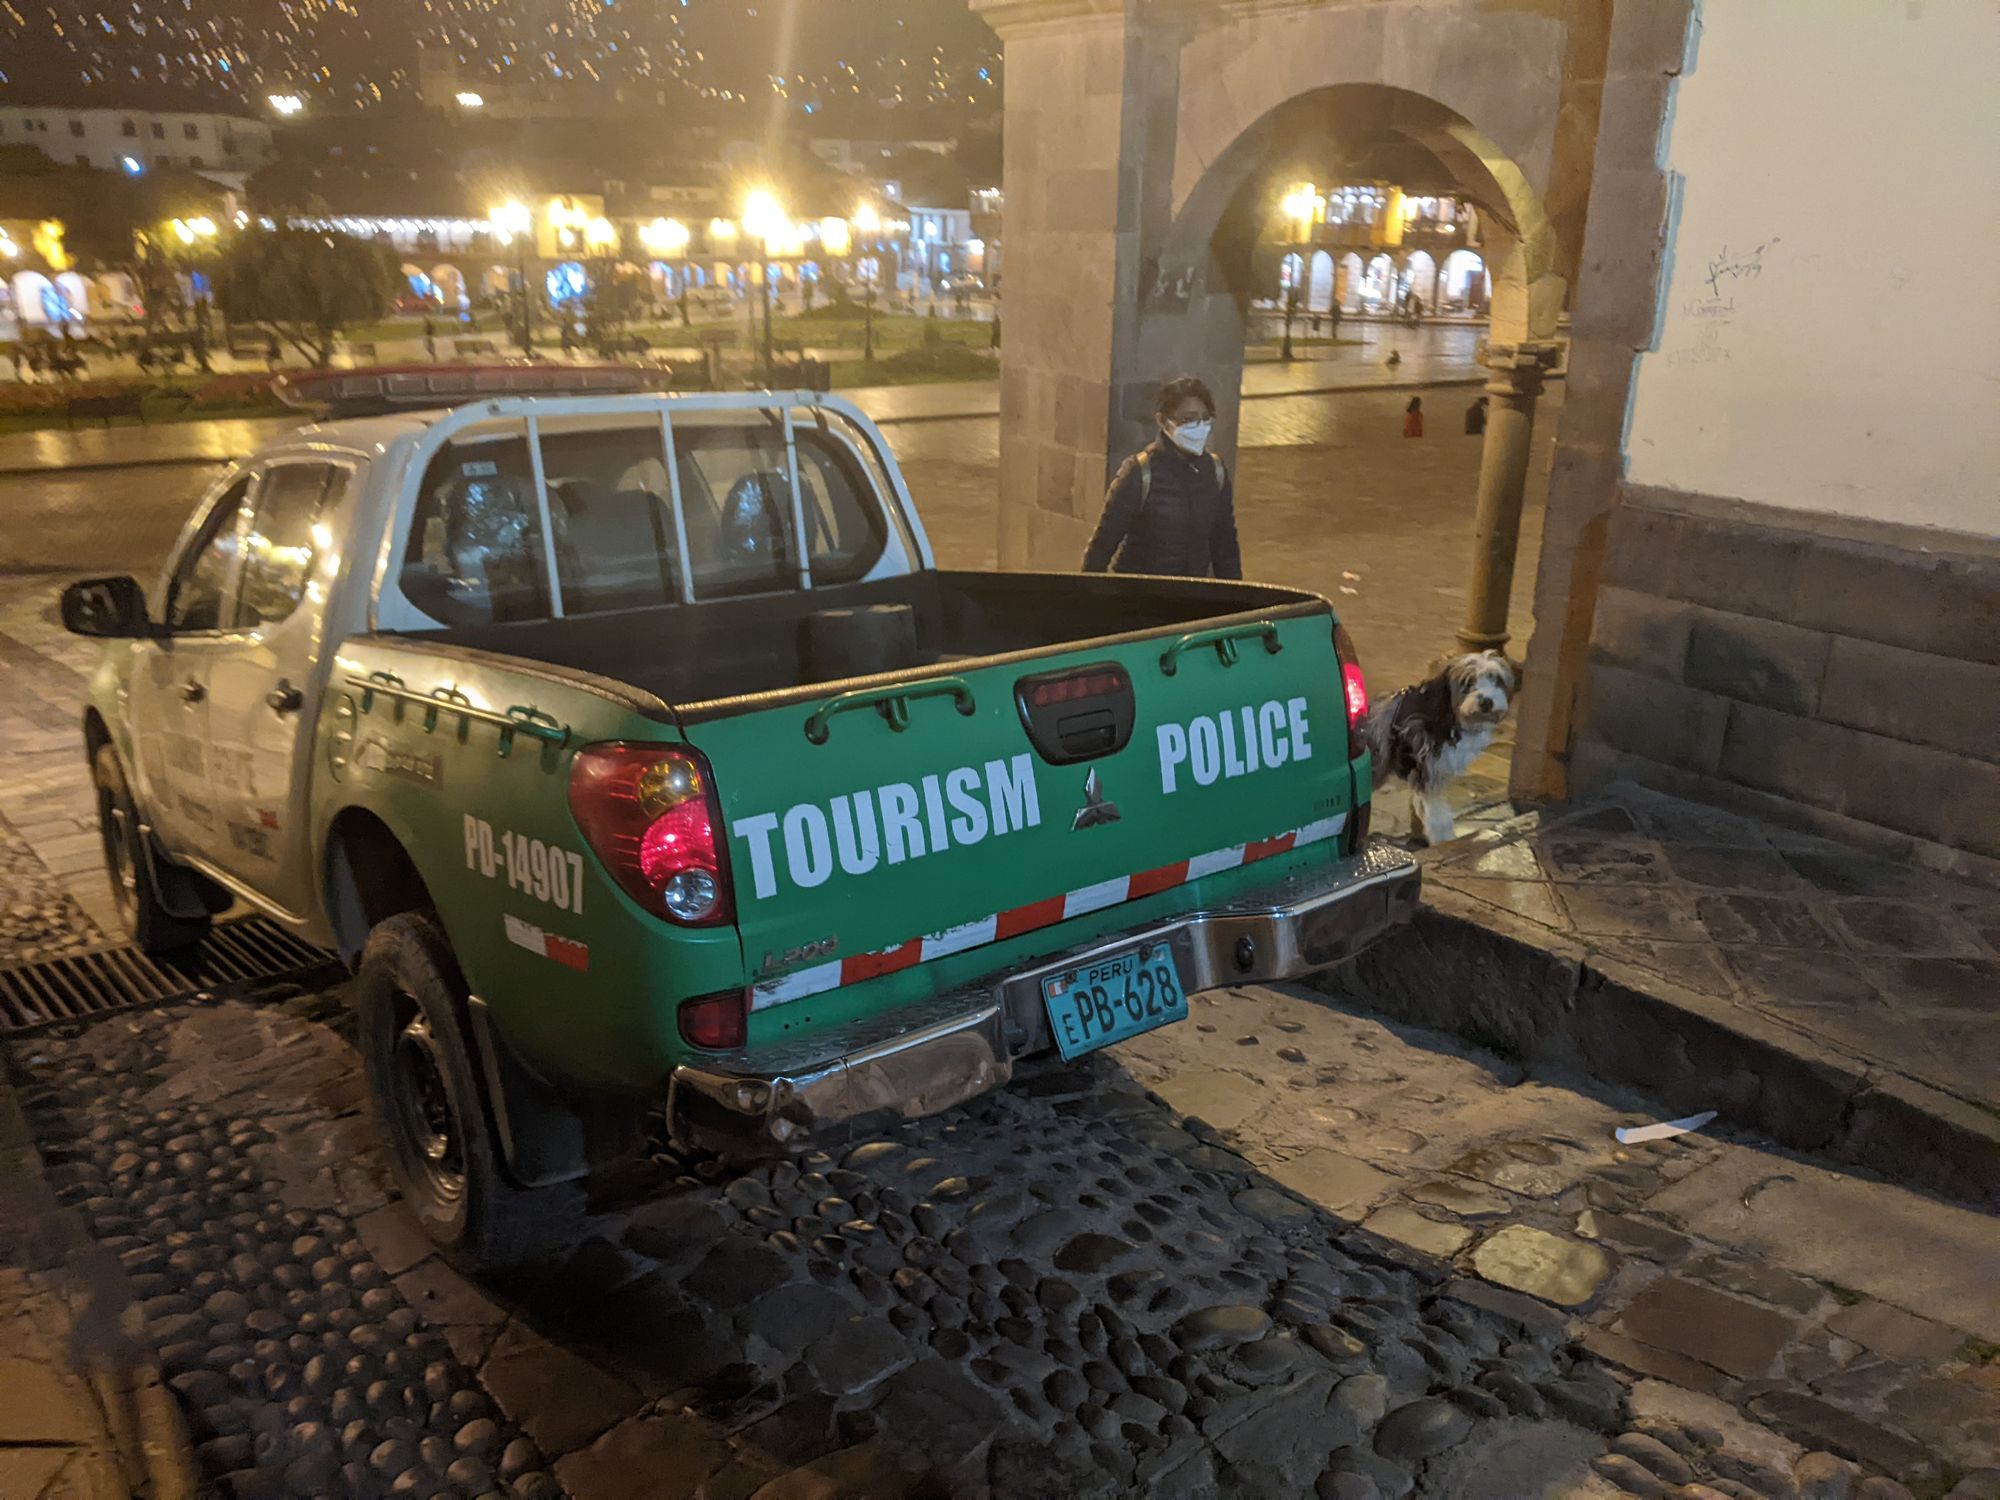 The only police vehicles I’ve seen are “Tourism Police” which show how safe they want the tourists to be!